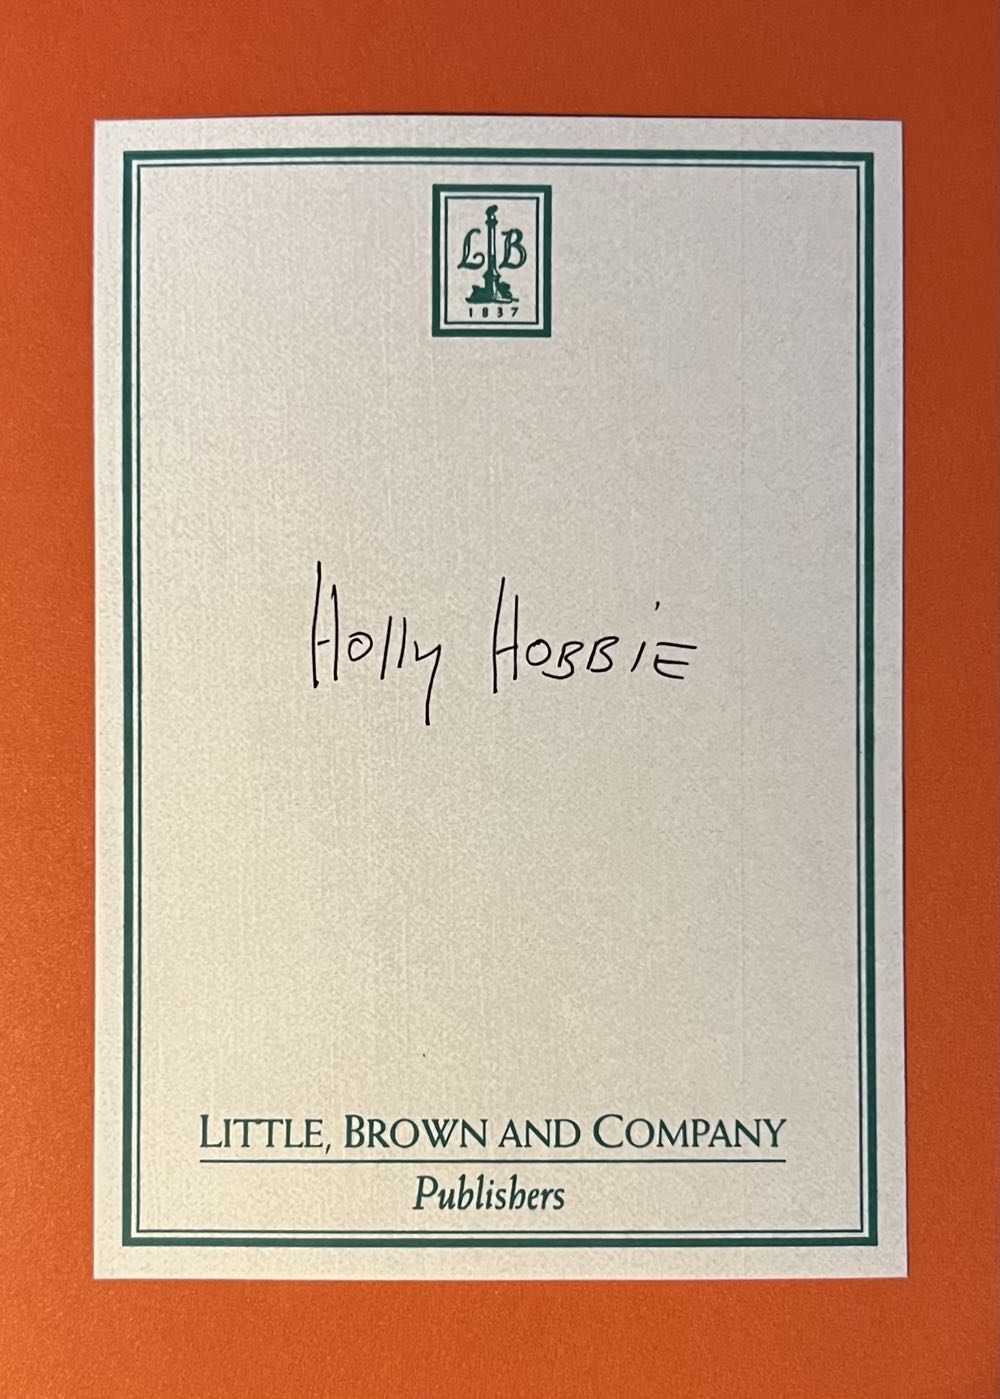 I’ll Be Home For Christmas - Holly Hobbie (Little, Brown and Company  - Hardcover) book collectible [Barcode 9780316366236] - Main Image 2